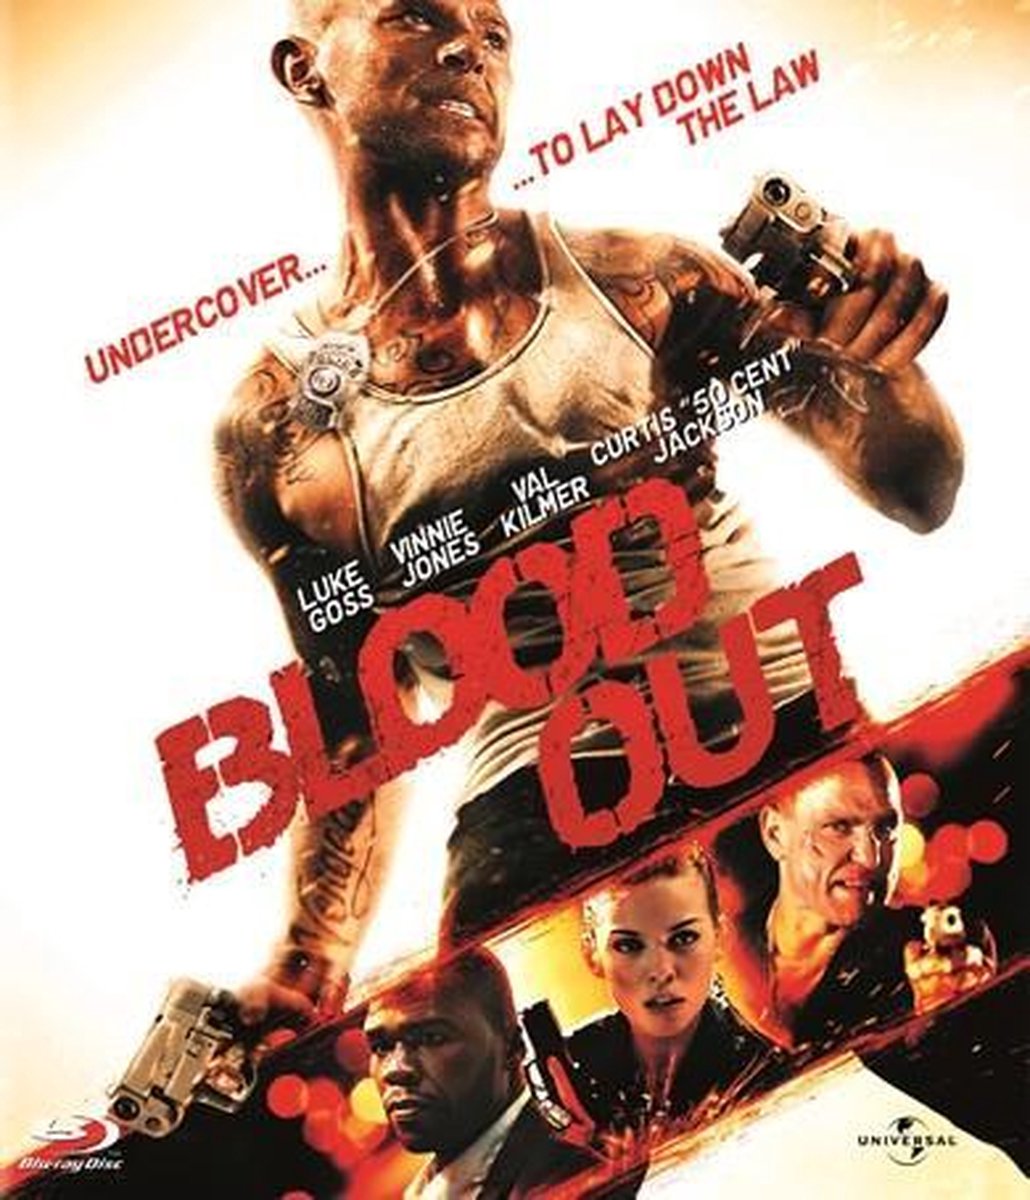 Blood Out (Blu-ray)